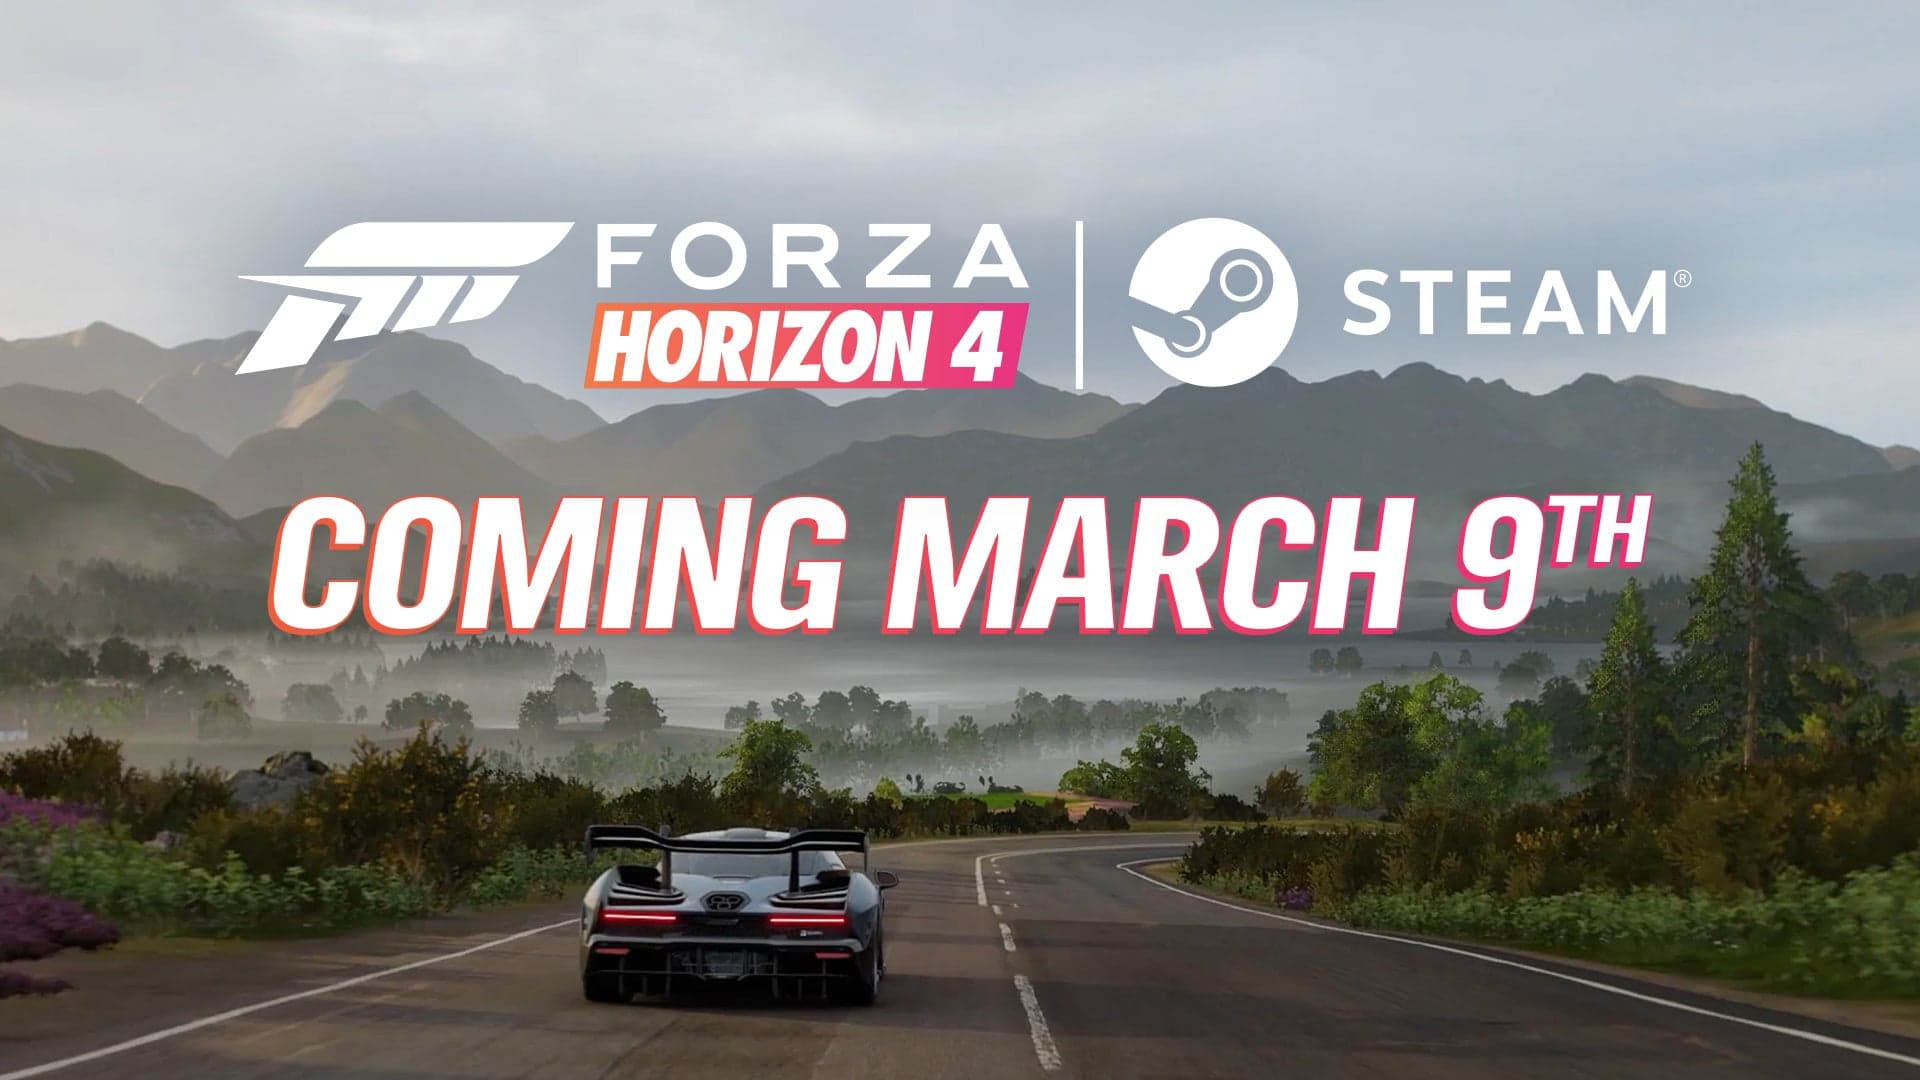 Forza Horizon 4 Is Coming to Steam and We’re Giving a Copy Away